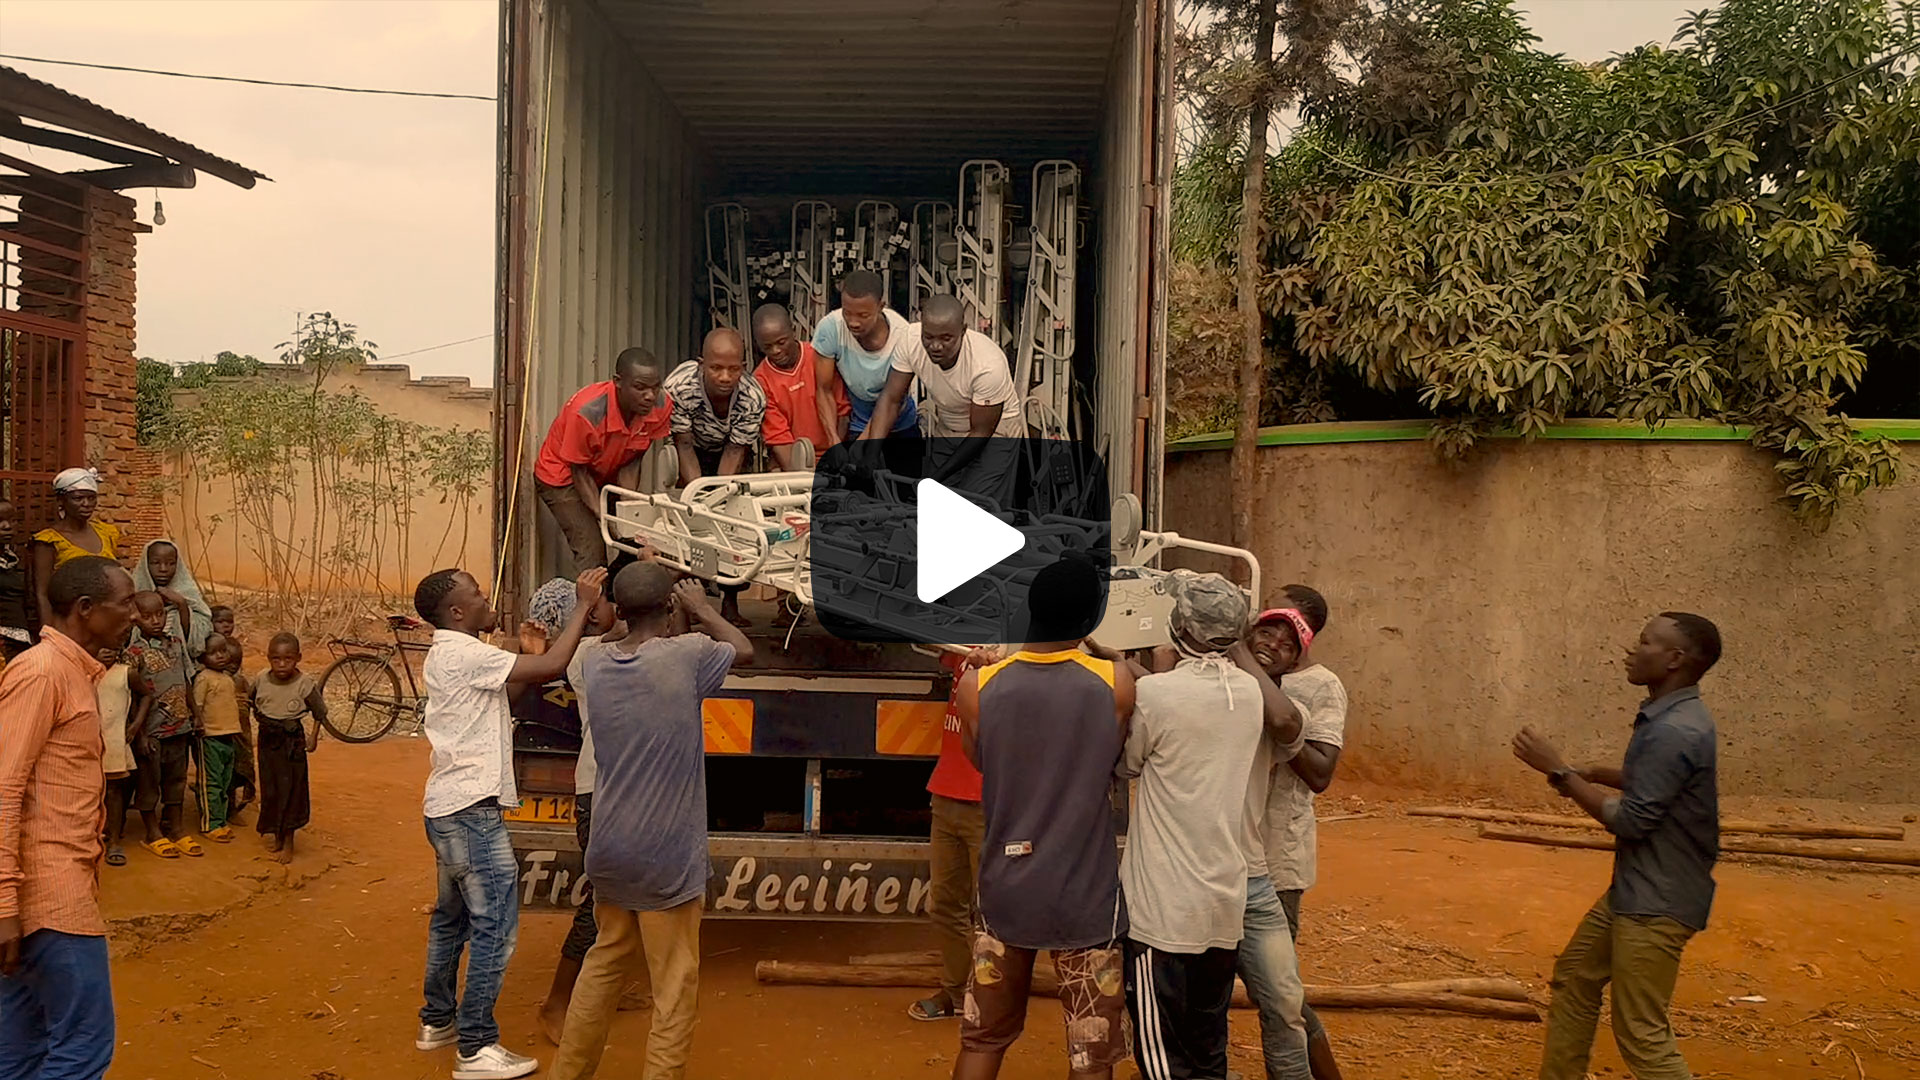 Preview image for video update about the Container 2021 project, shows people in Burundi unpacking the container